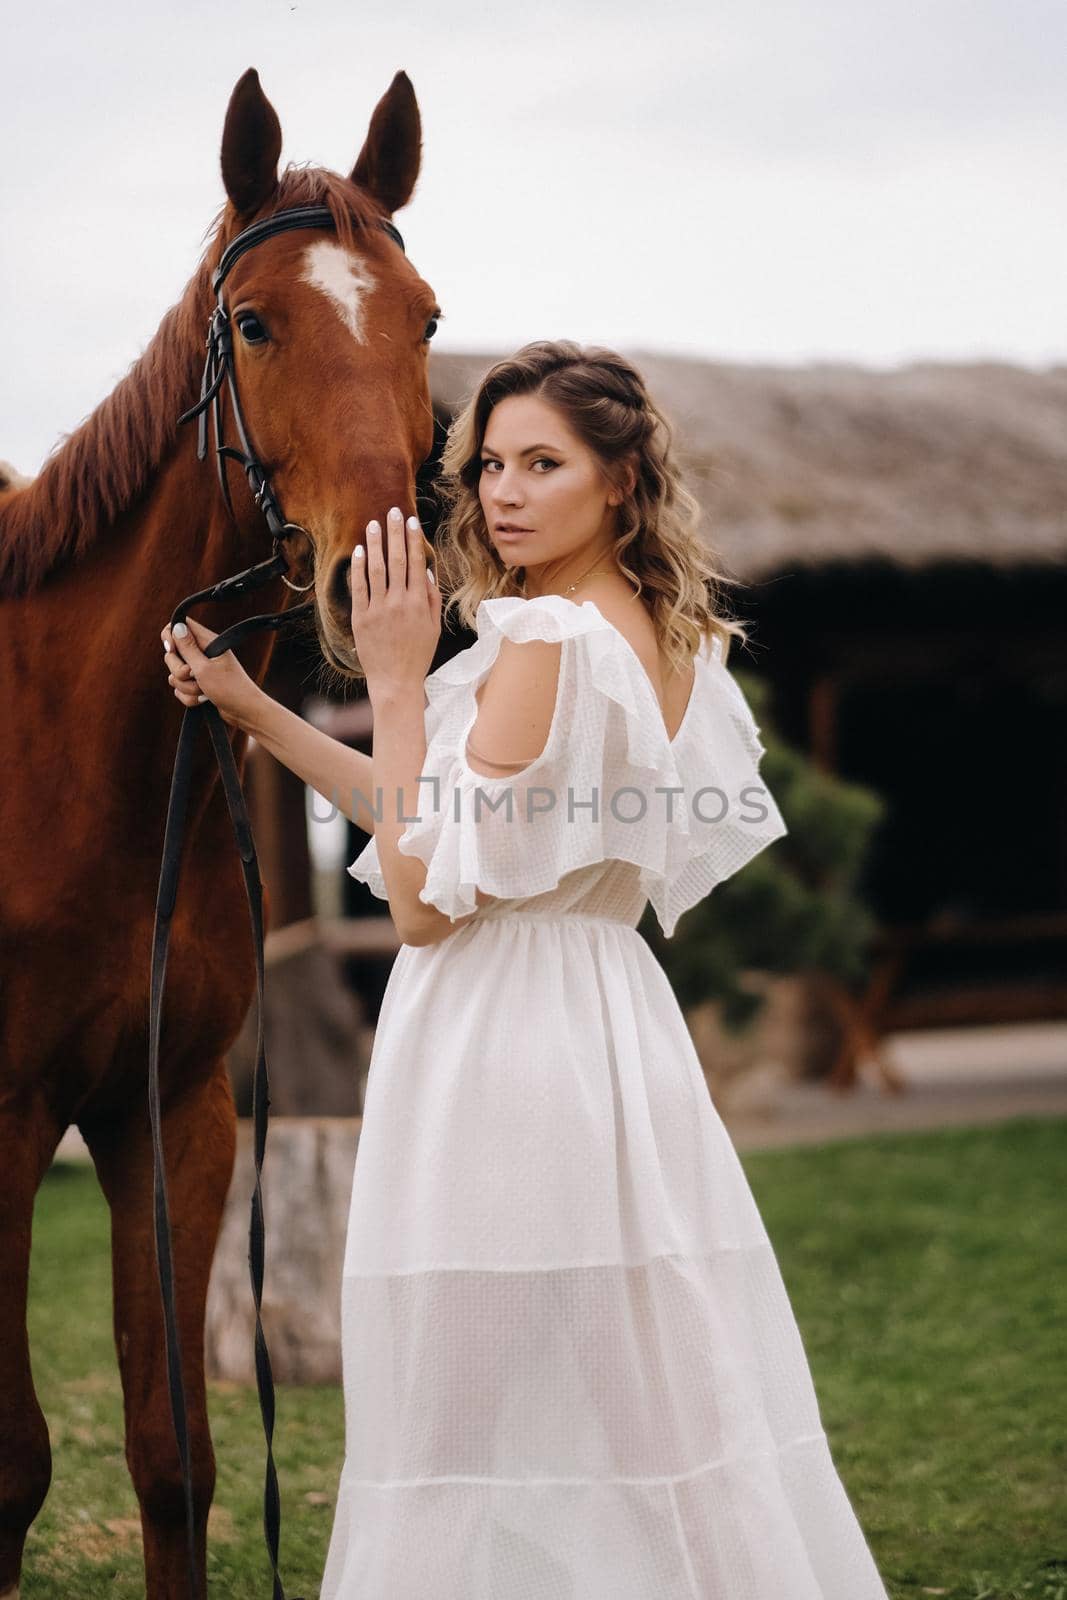 Beautiful girl in a white sundress next to a horse on an old ranch.